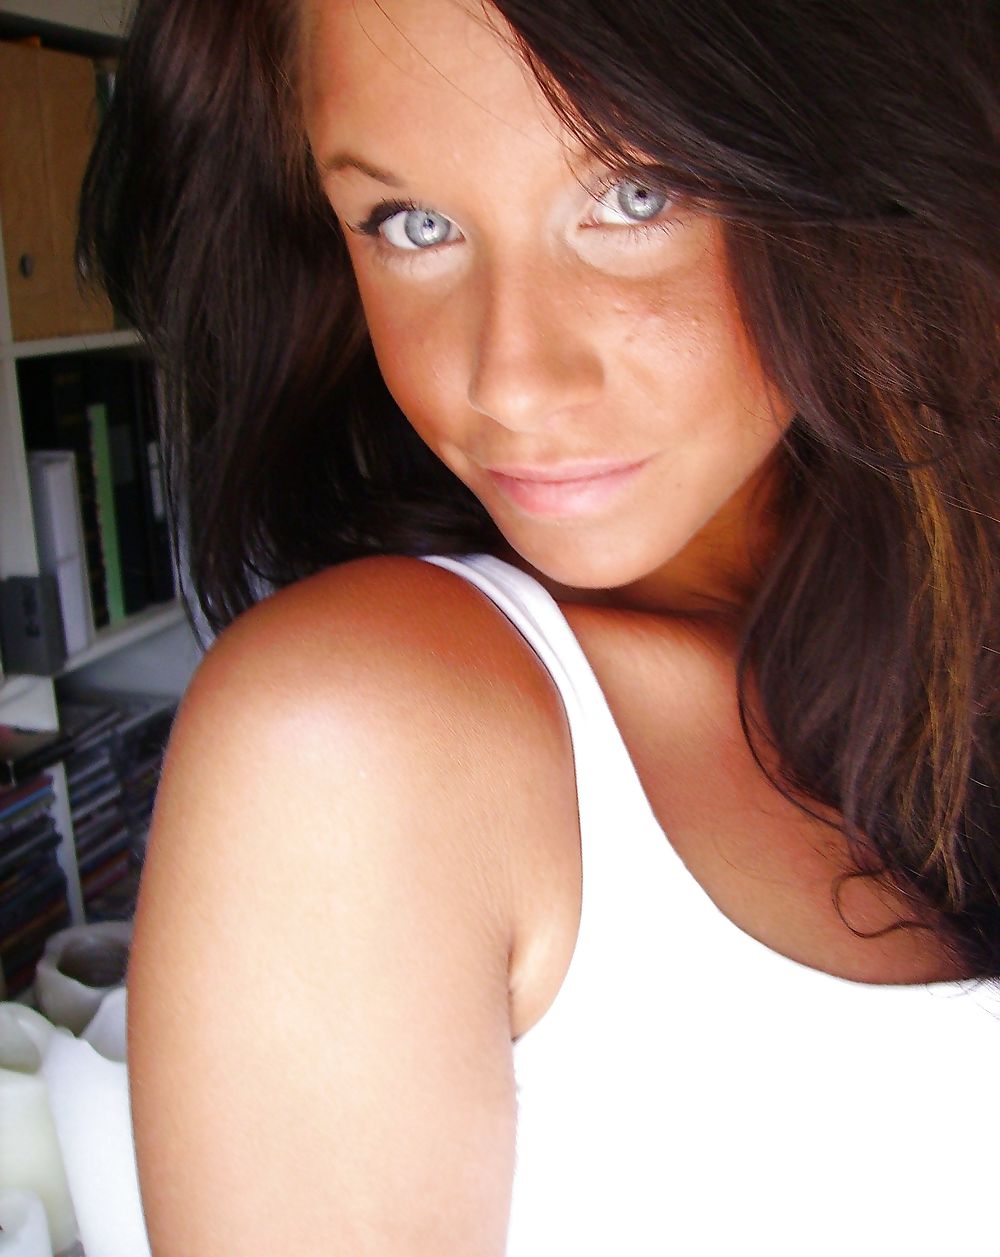 Another hot girl with blue eyes #21442443